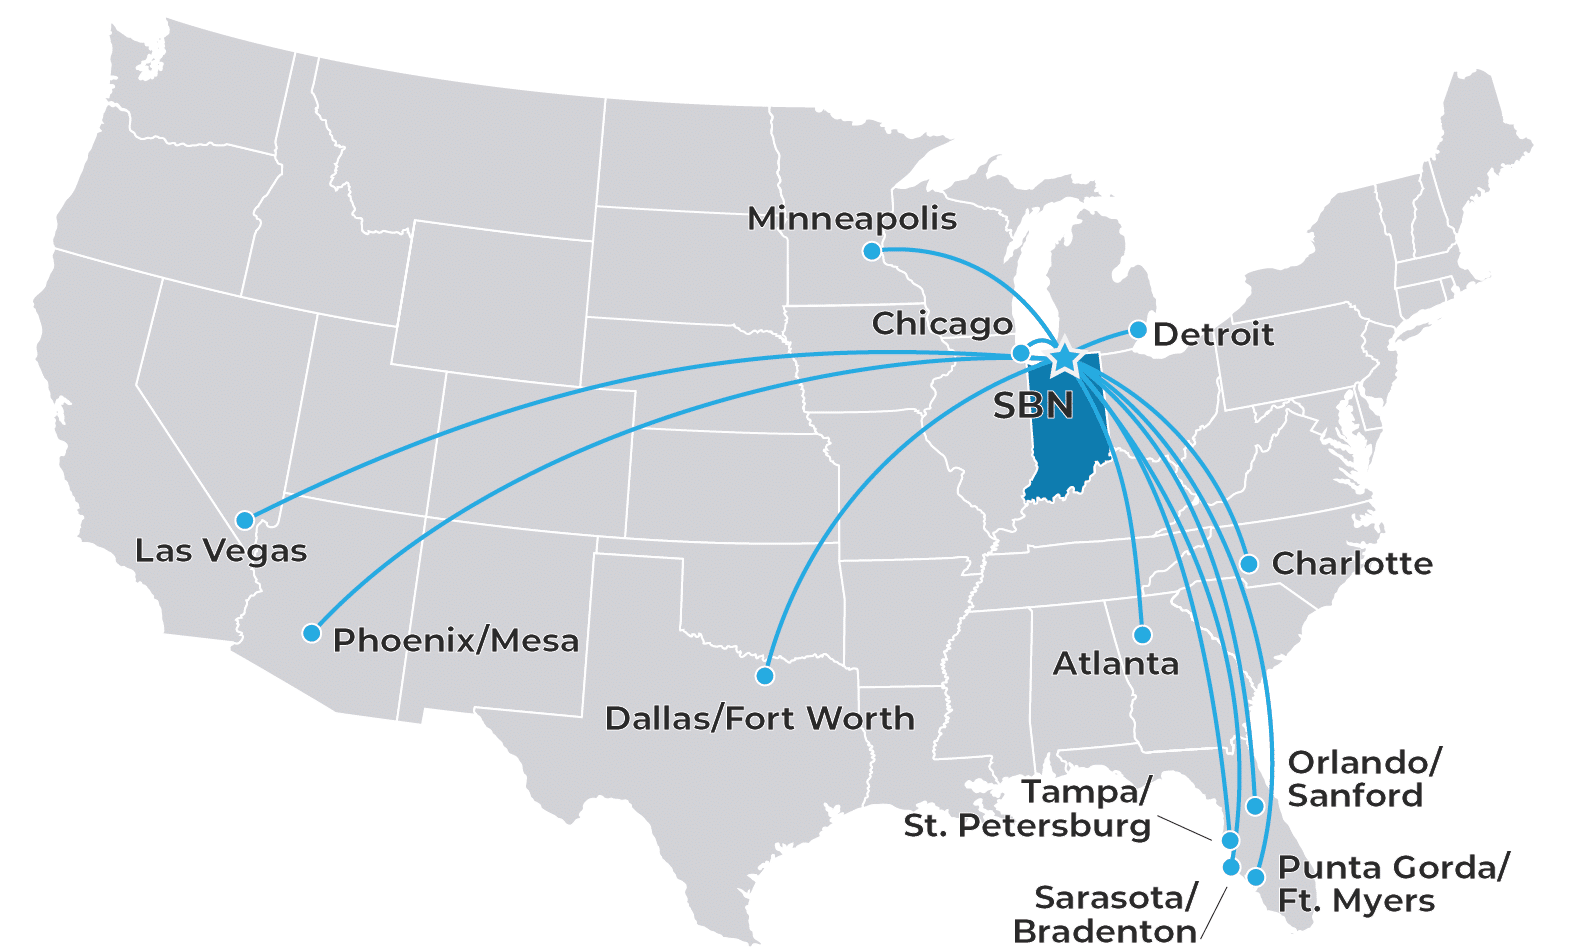 Route map showing nonstop flights to cities in the U.S. from South Bend